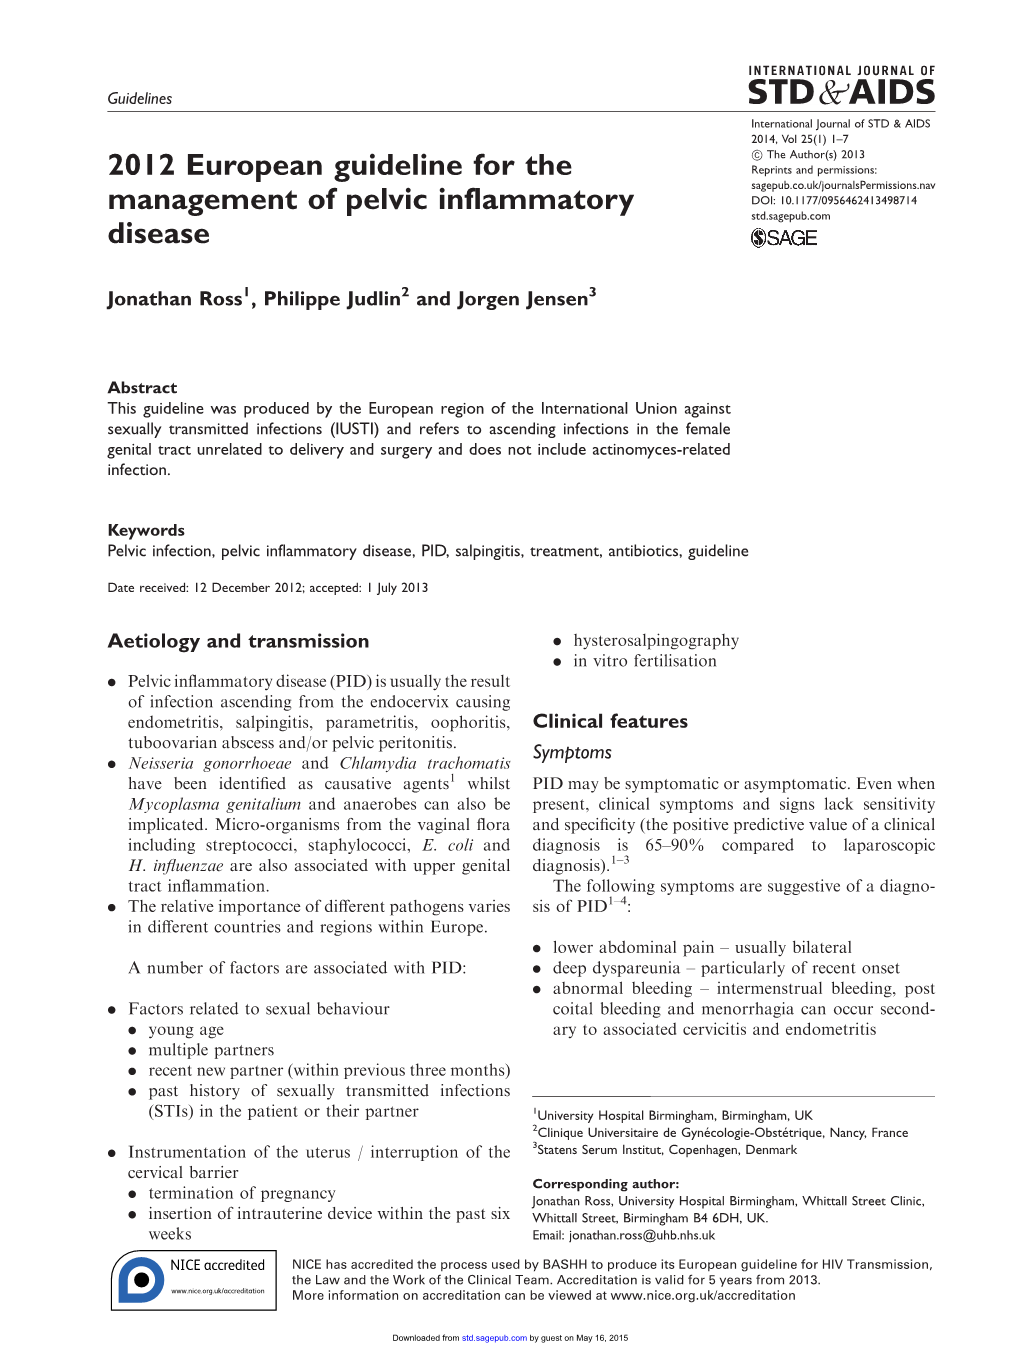 2012 European Guideline for the Management of Pelvic Inflammatory